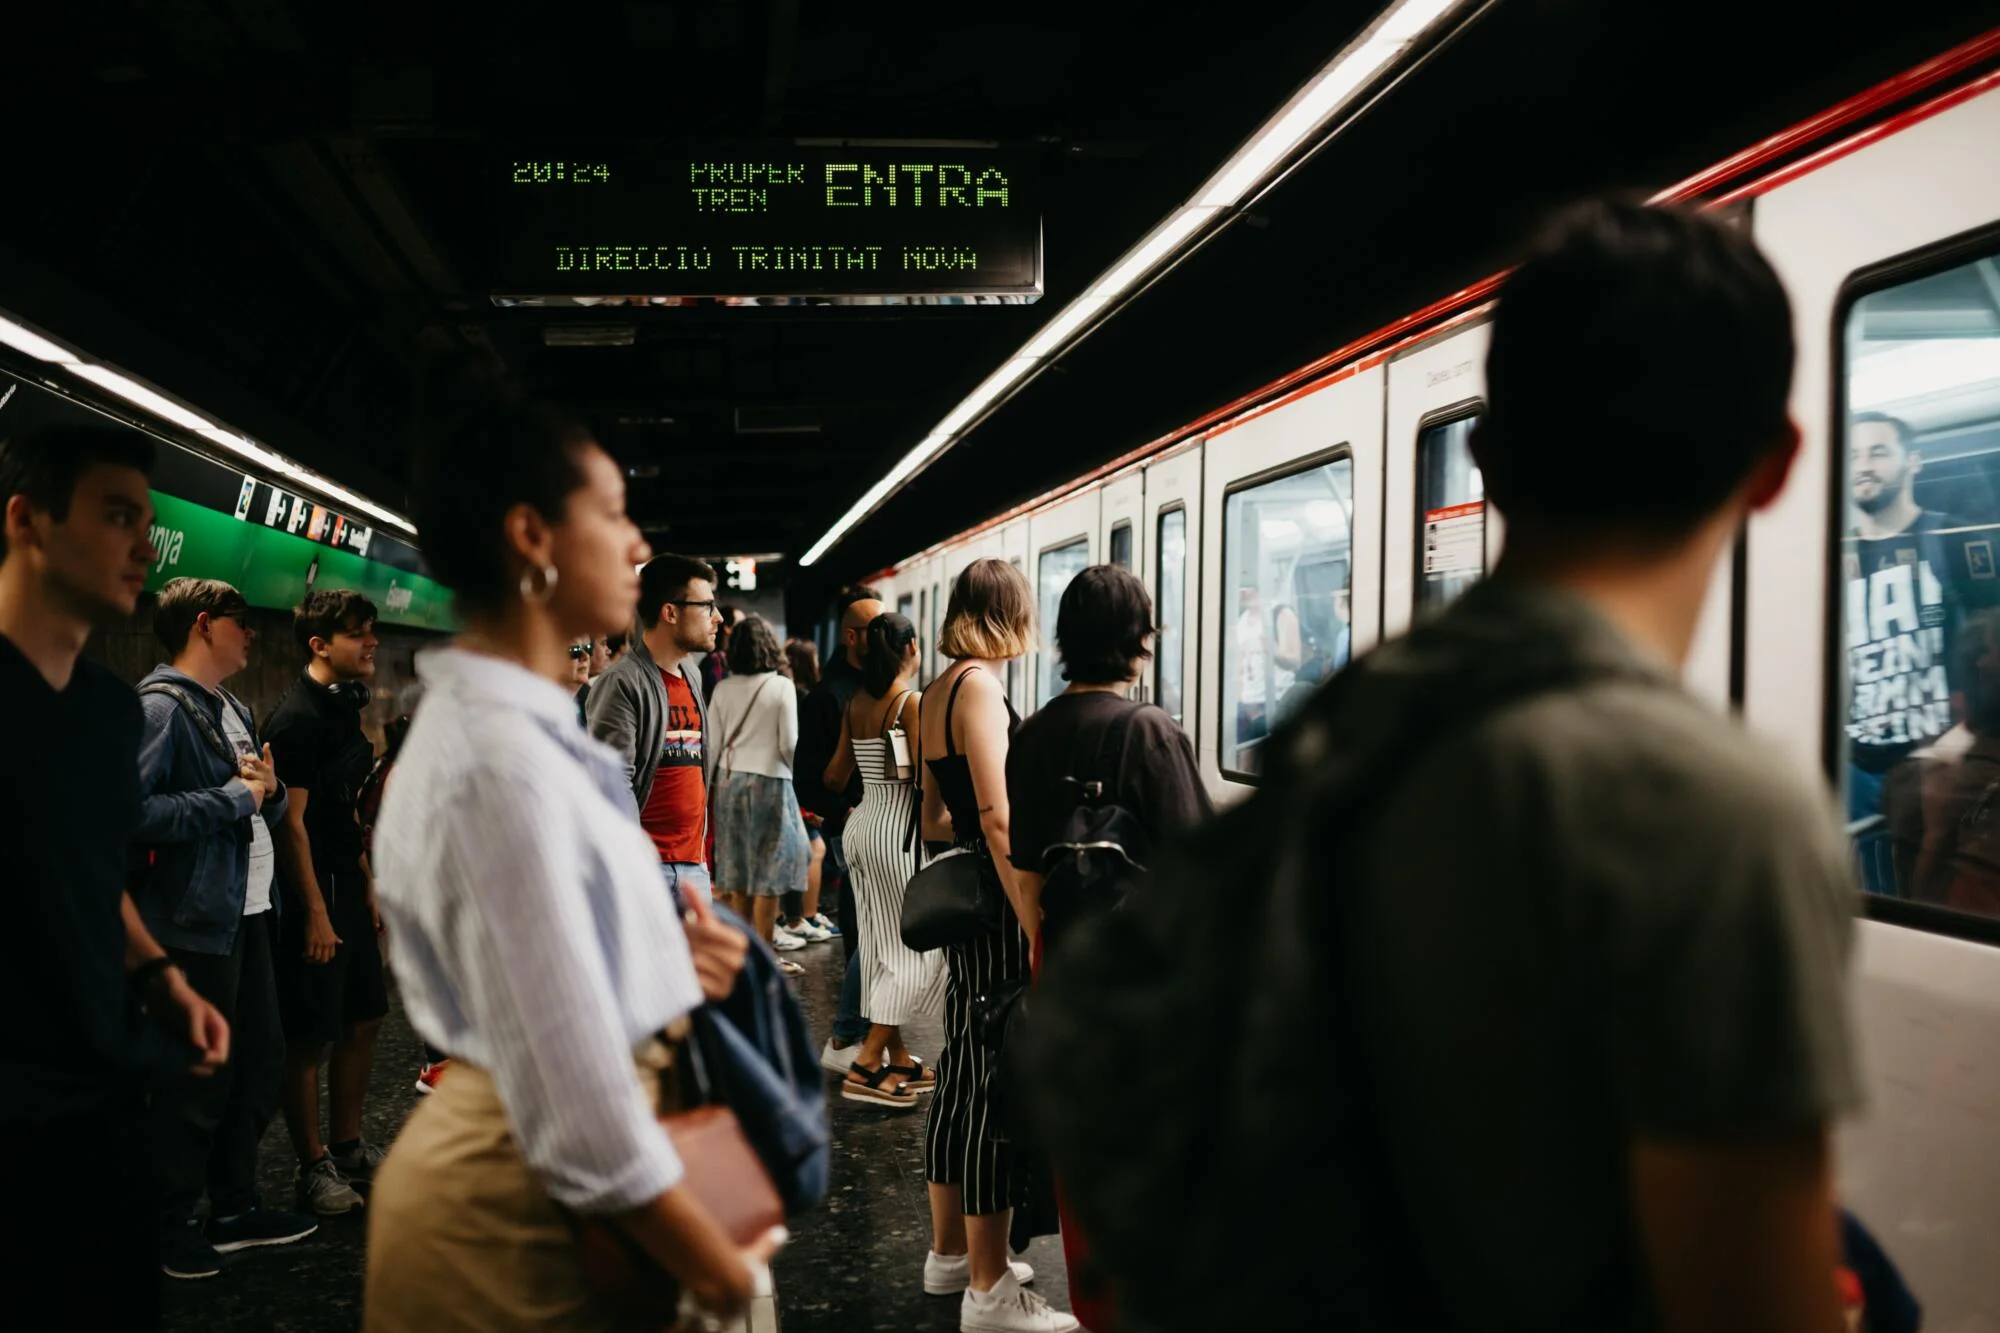 Research reveals harassment on Barcelona’s public transport